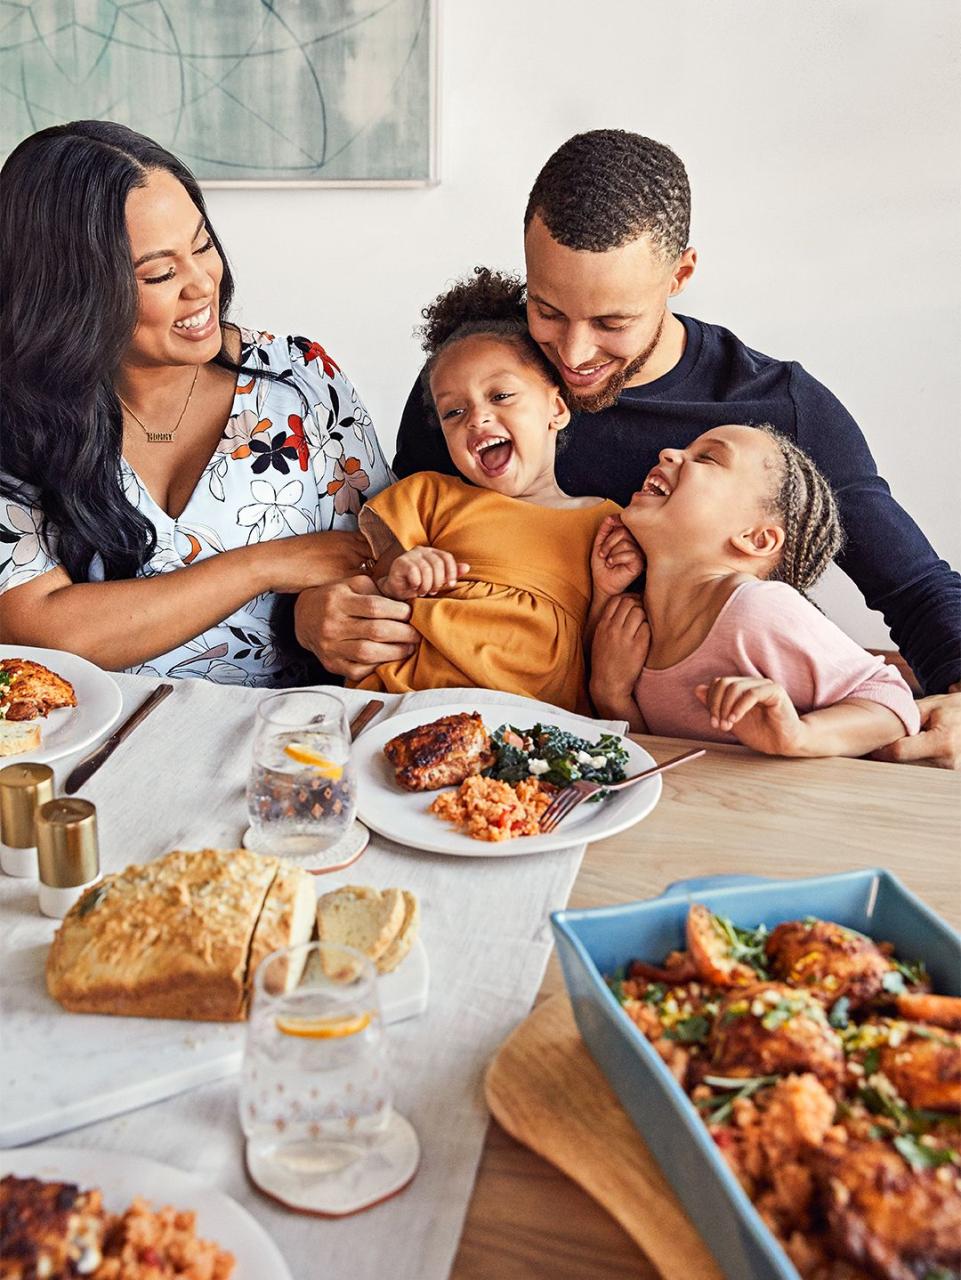 likhoa chef ayesha curry surprisingly prepares to participate in the thanksgiving festival with a delicious table for stephen curry and her beloved family 6564521fca859 Chef Ayesha Curry Surprisingly Prepares To Participate In The Thanksgiving Festival With A Delicious Table For Stephen Curry And Her Beloved Family